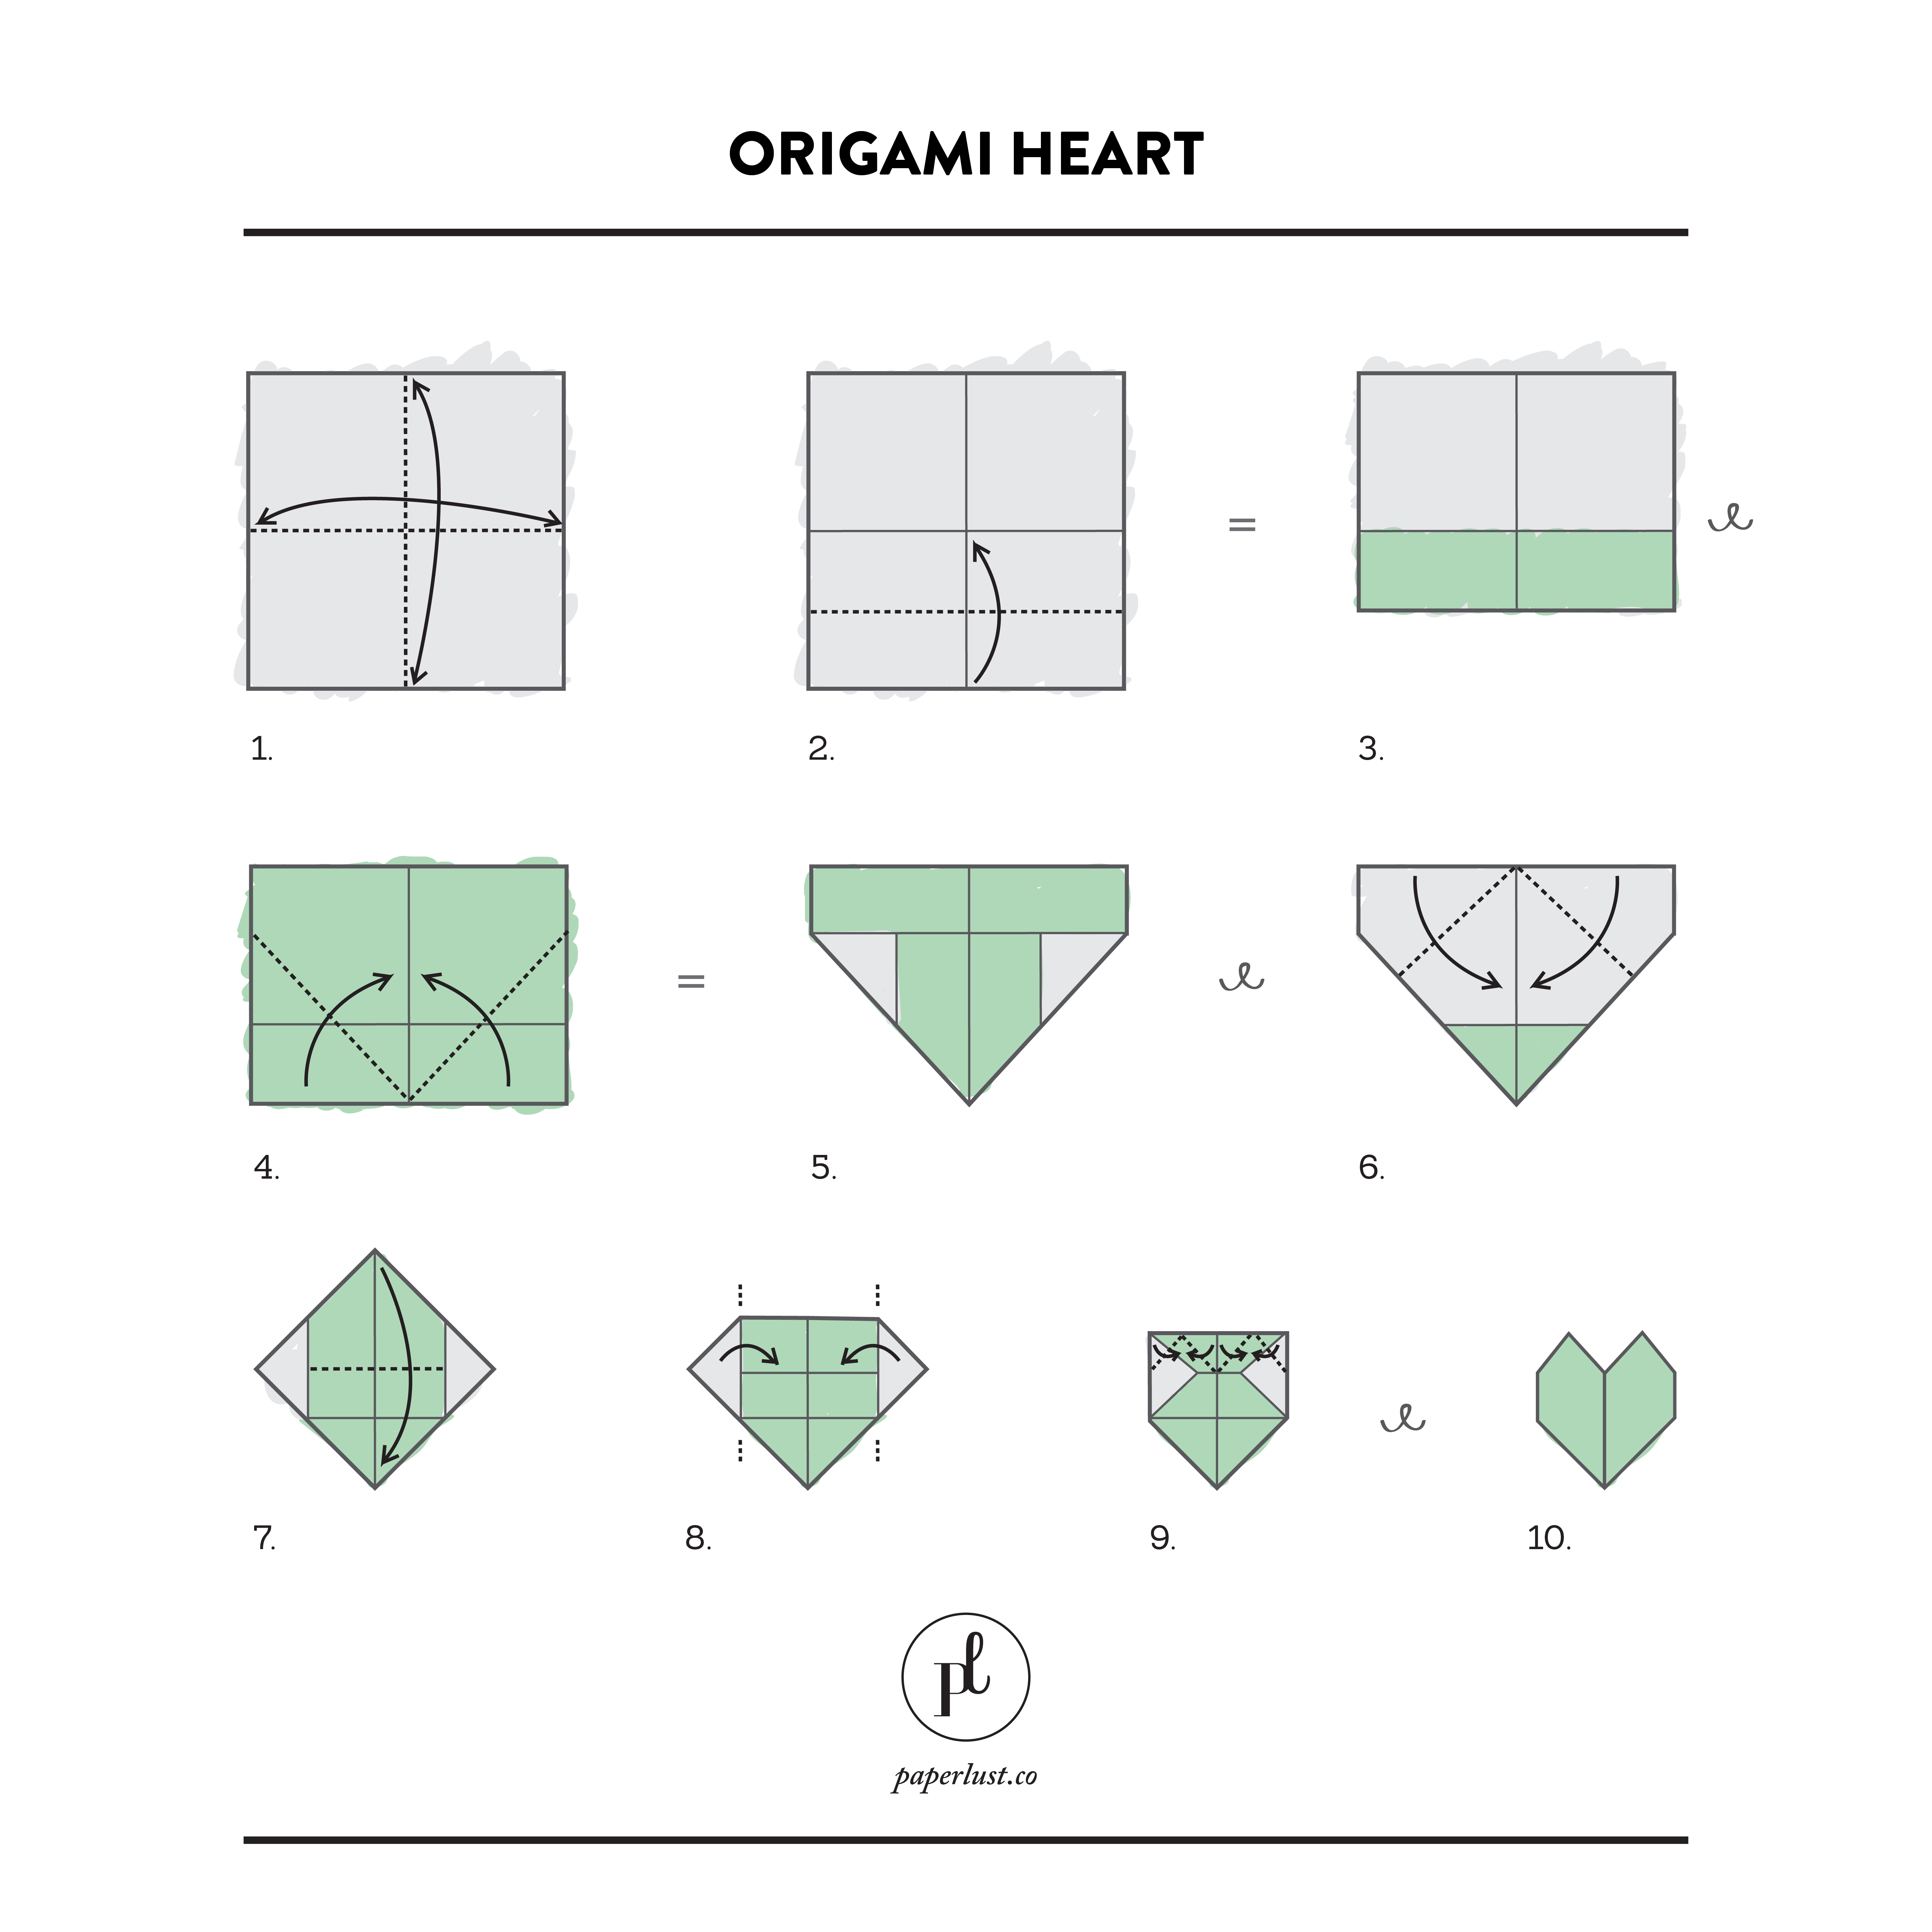 How To Make Easy Origami Box Origami Origami Super Easy Origami Heart Instructions Origami Box